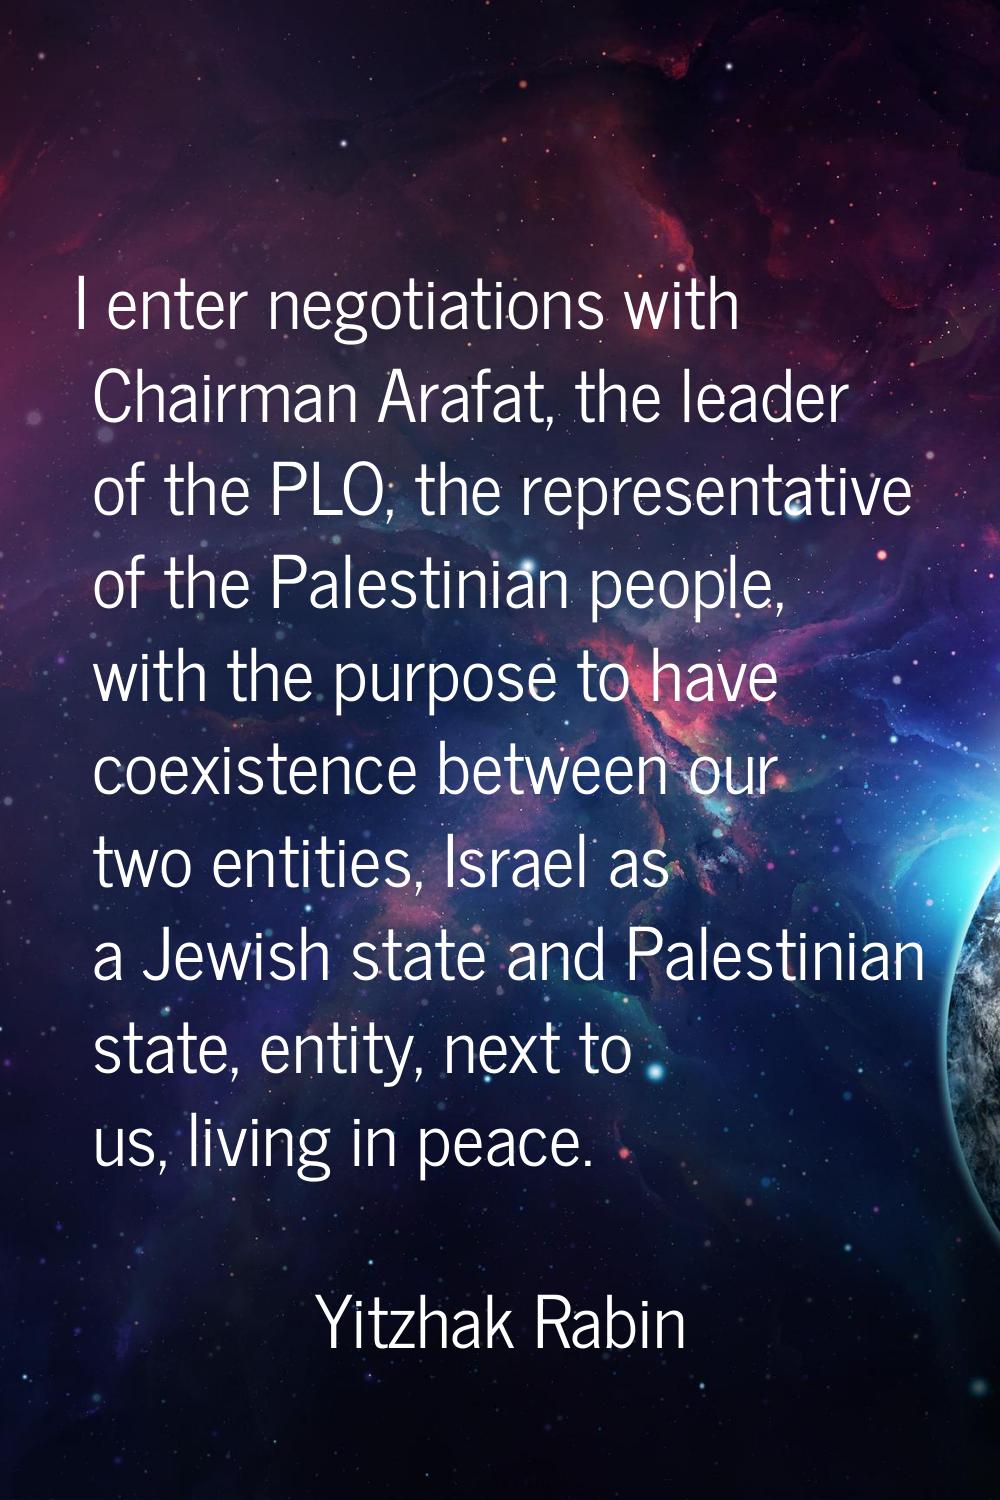 I enter negotiations with Chairman Arafat, the leader of the PLO, the representative of the Palesti